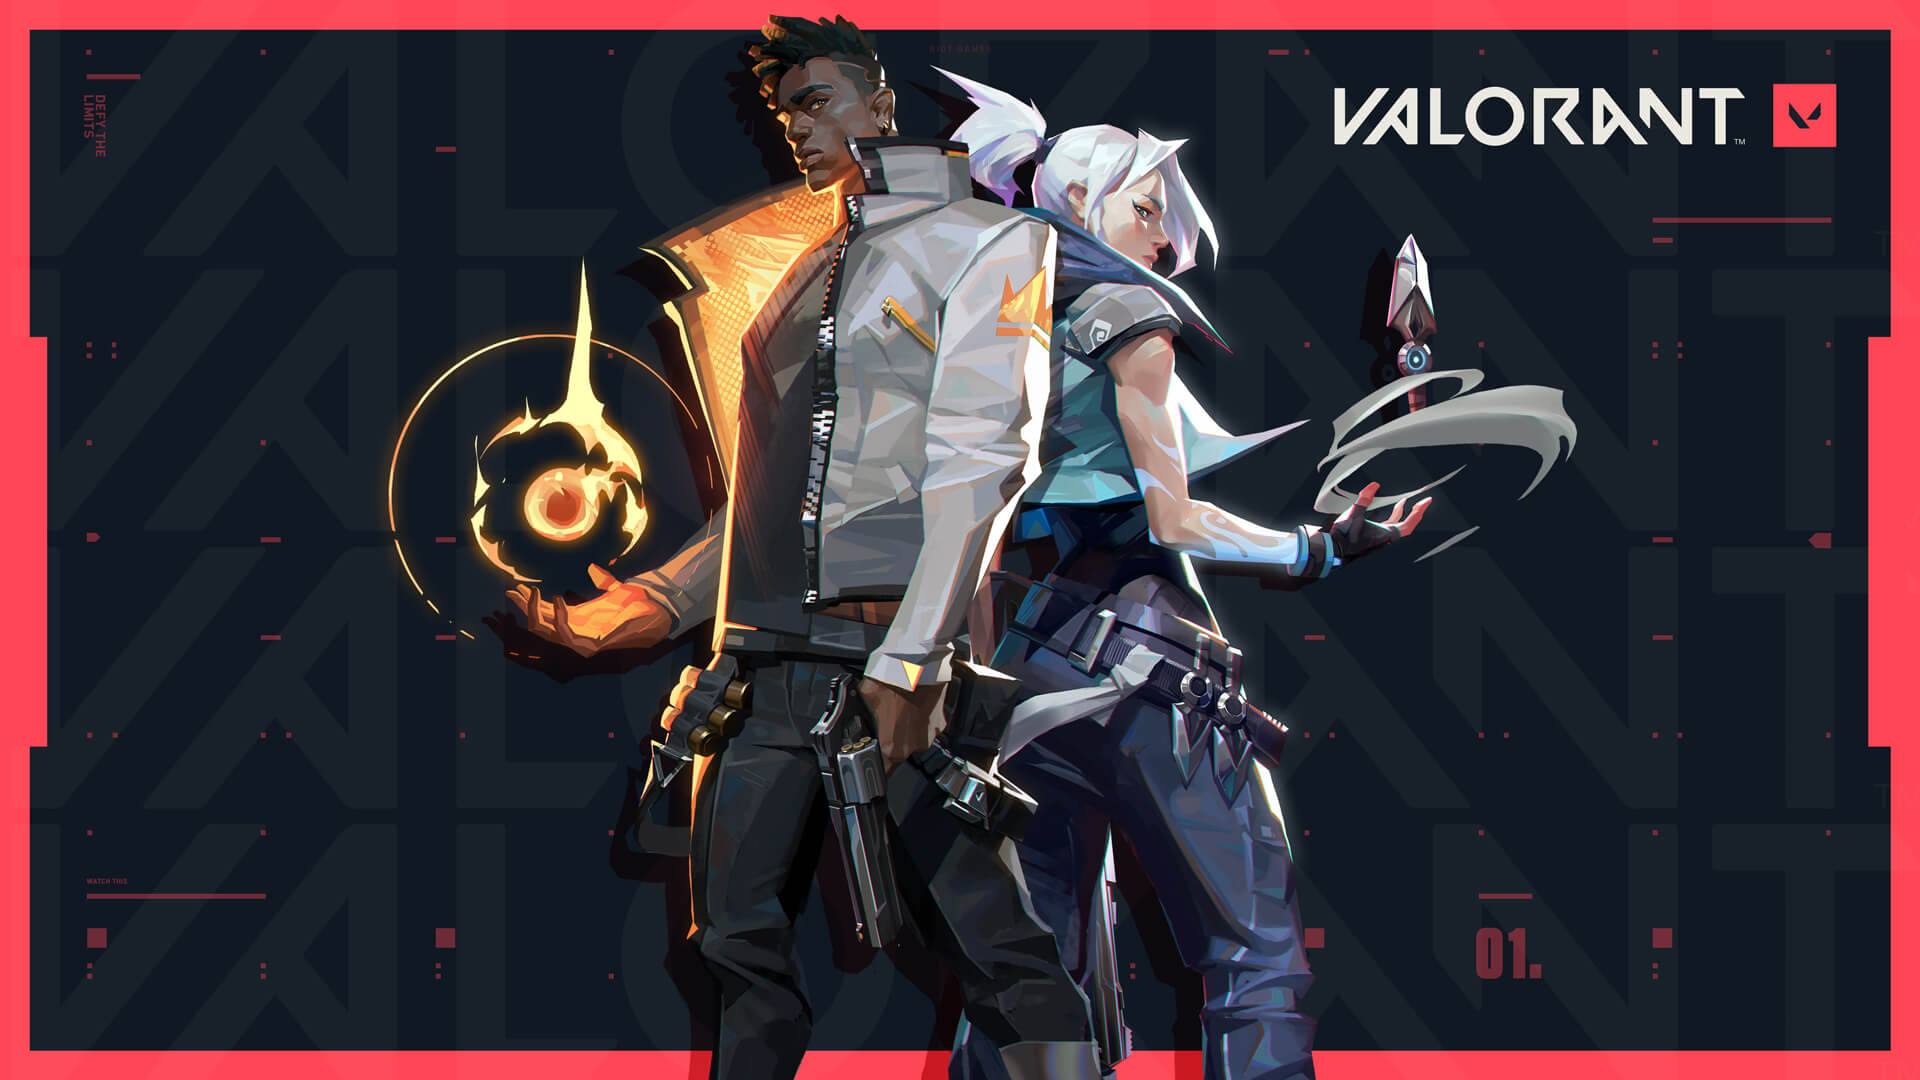 VALORANT is Coming to XBOX and Playstations